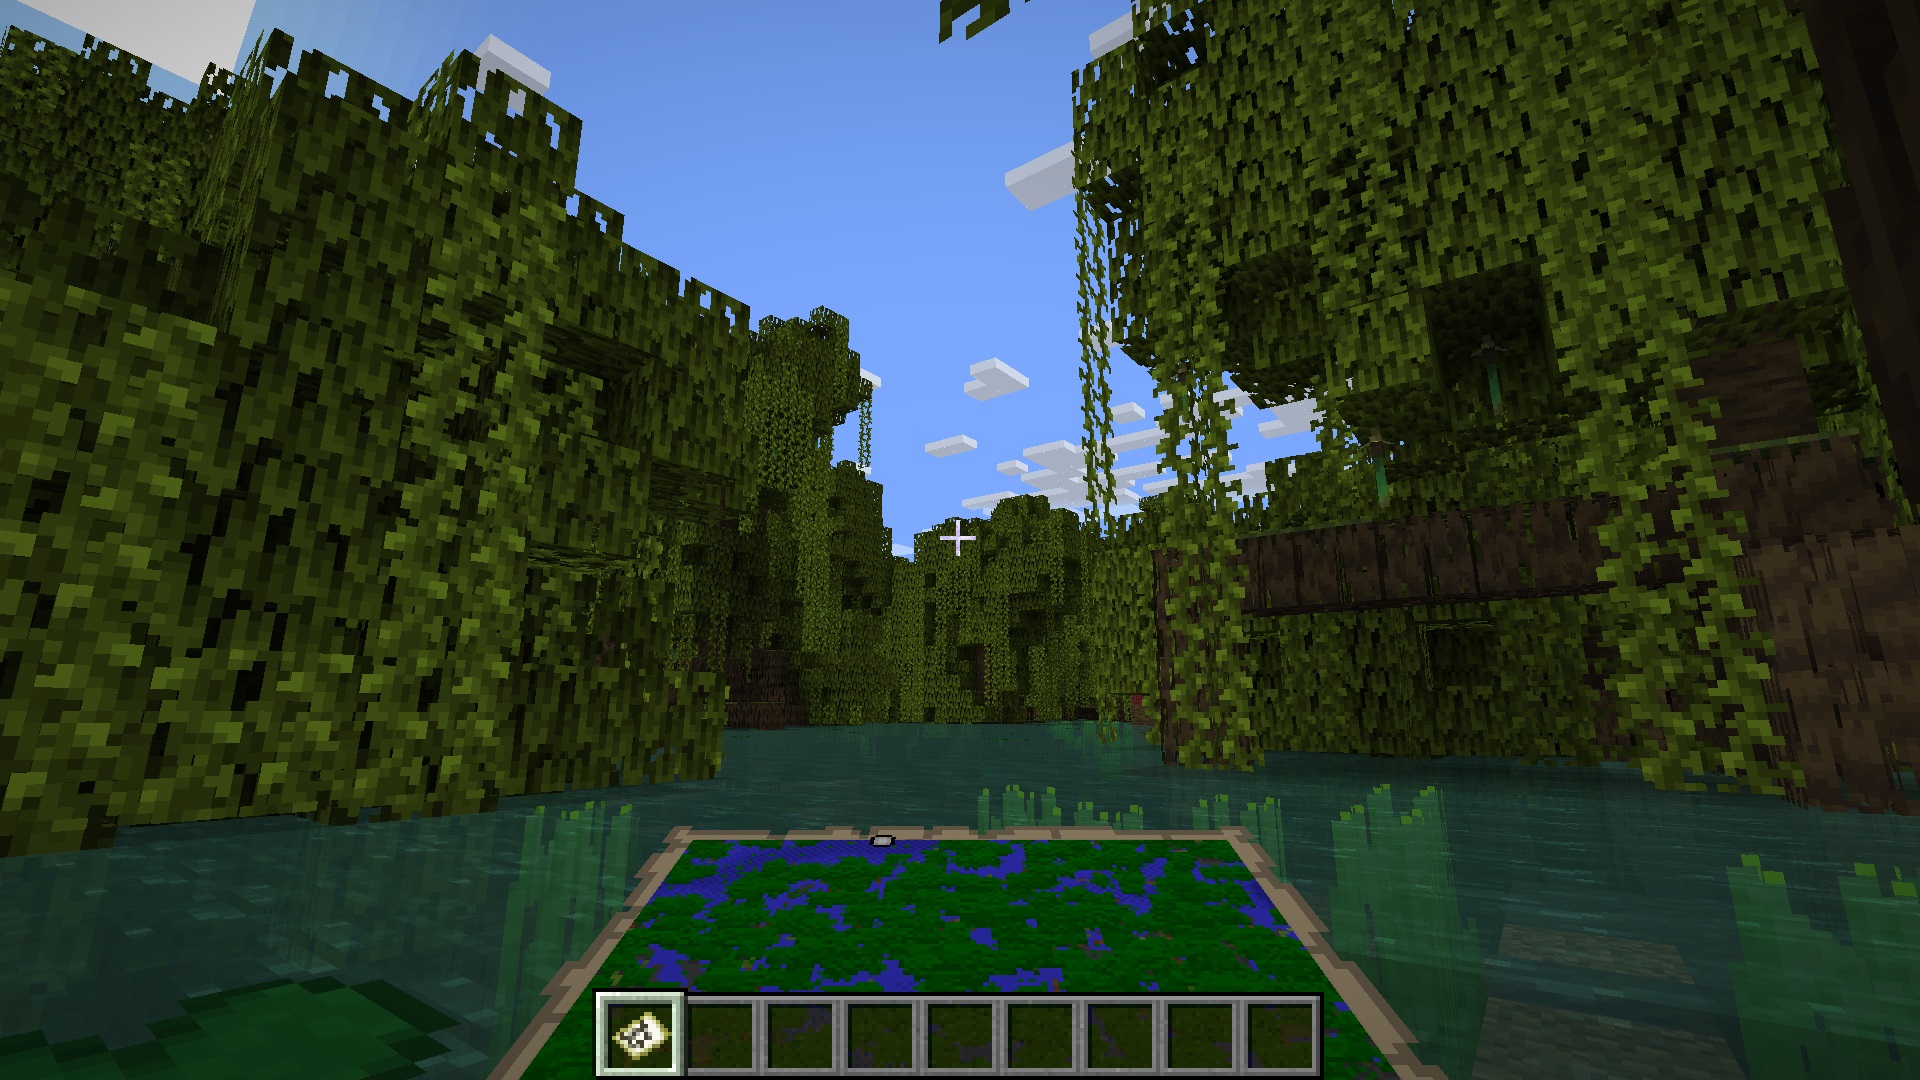 A rare version of Minecraft has been rediscovered ten years later